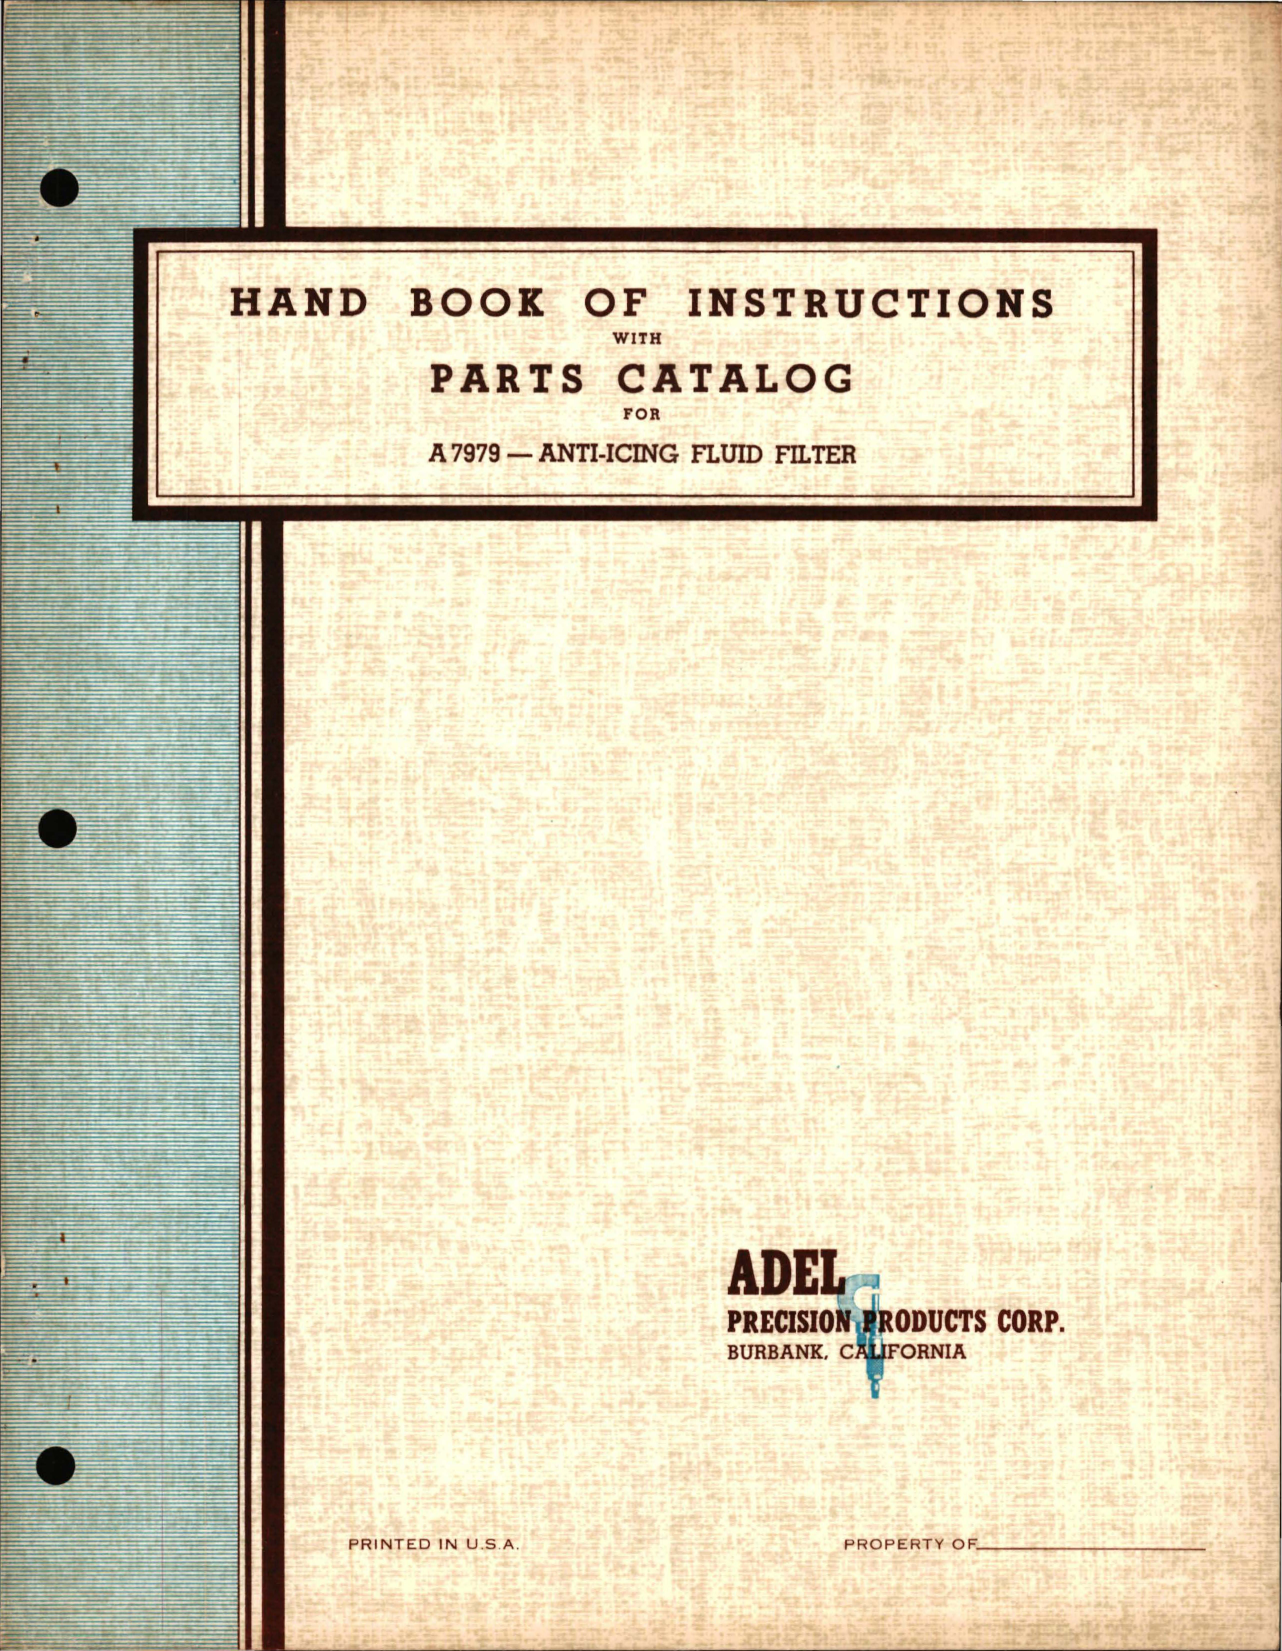 Sample page 1 from AirCorps Library document: Instructions with Parts Catalog for Anti-Icing Fluid Filter - A7979 